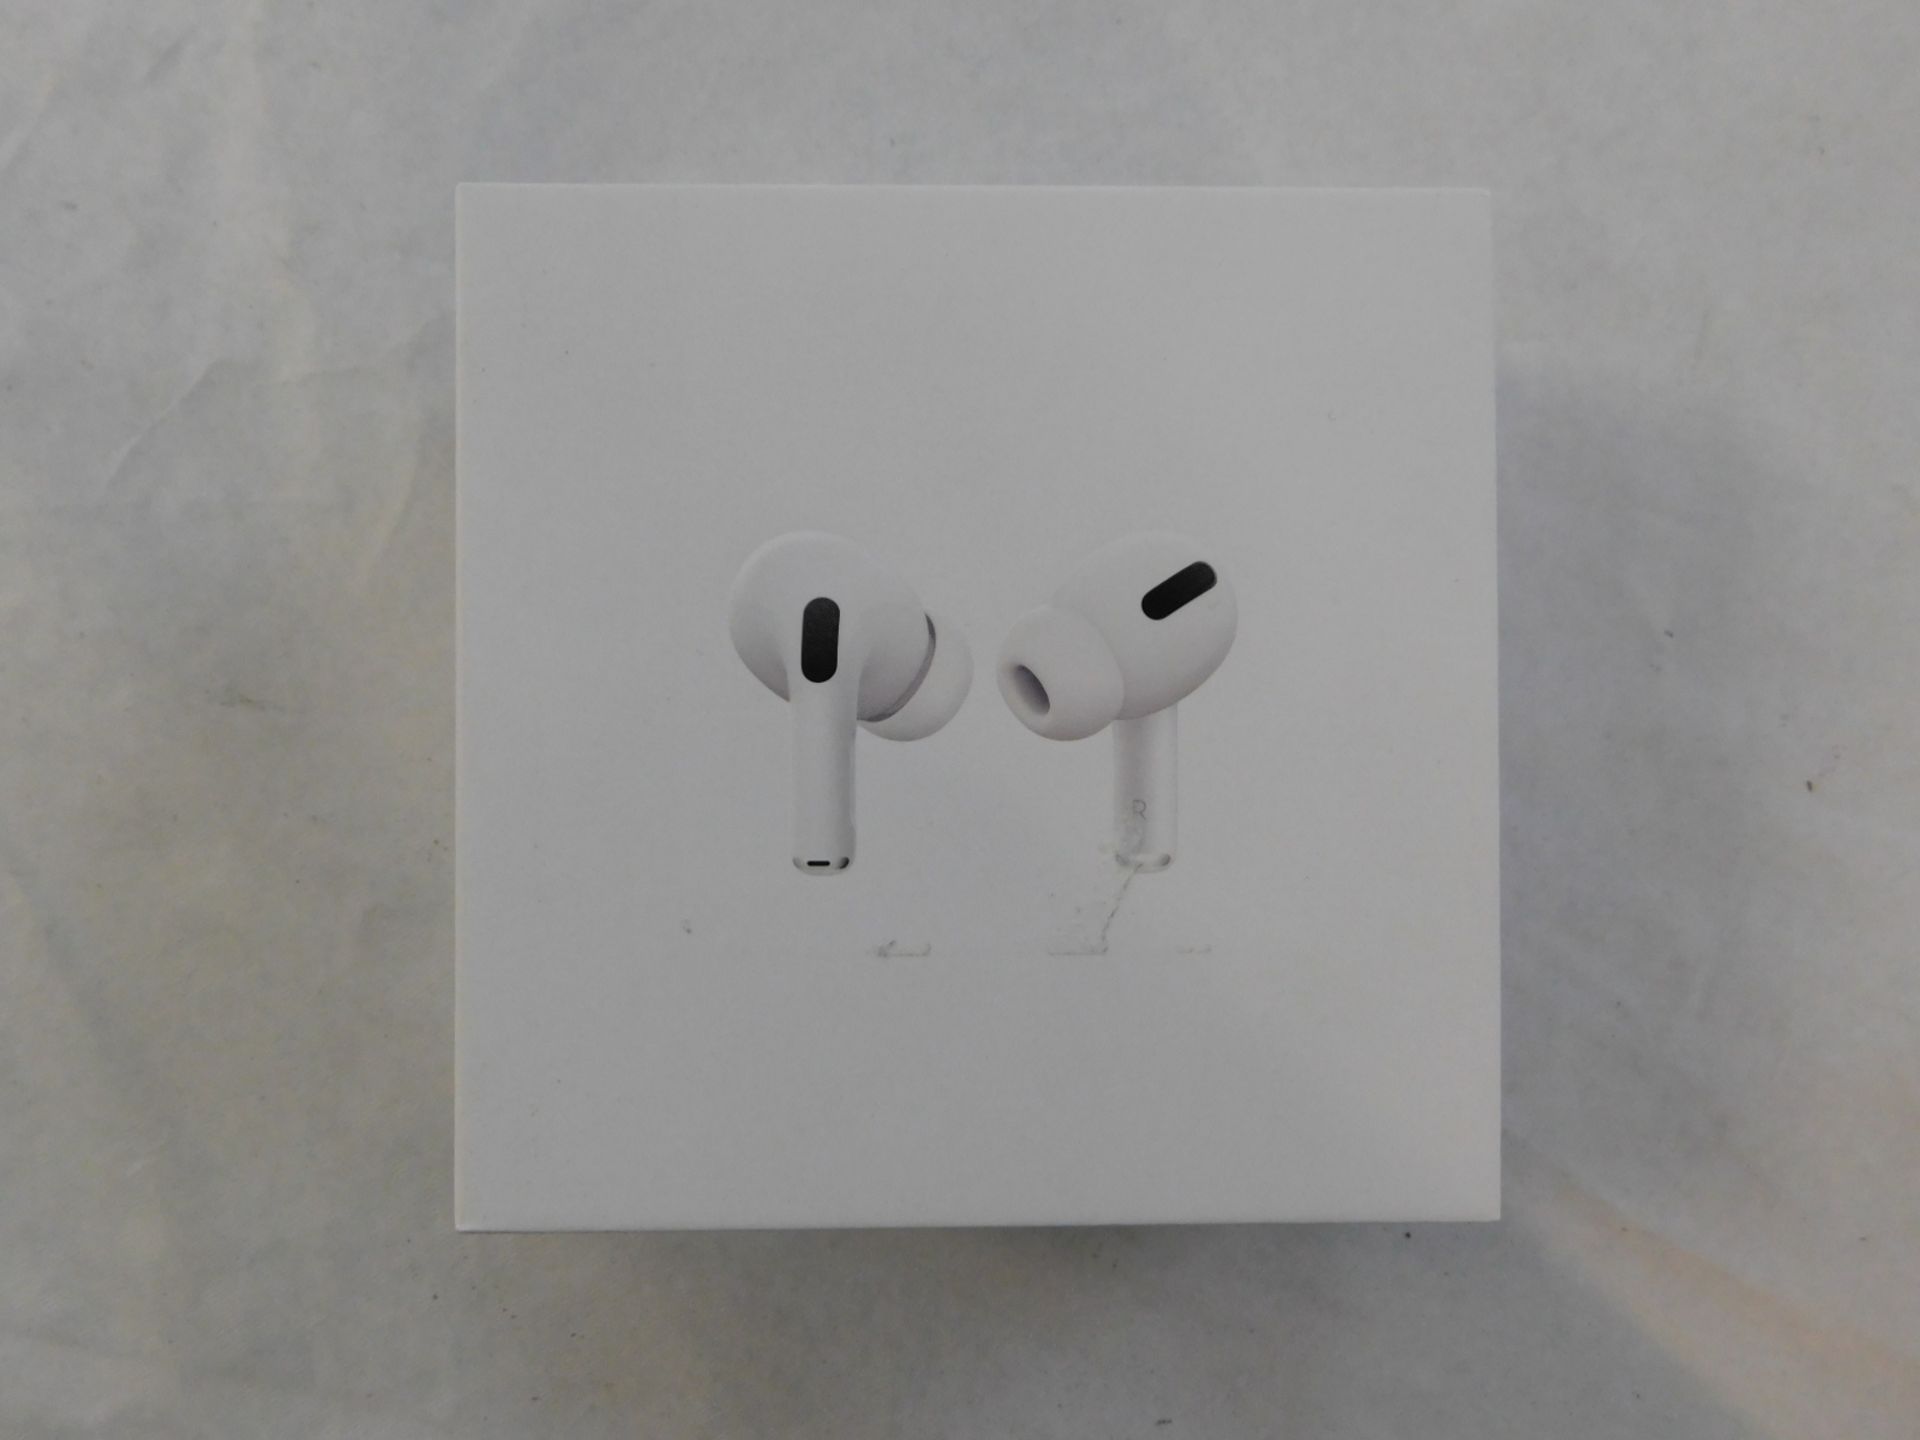 1 BOXED PAIR OF APPLE AIRPODS PRO BLUETOOTH EARPHONES WITH WIRELESS CHARGING CASE RRP Â£249.99